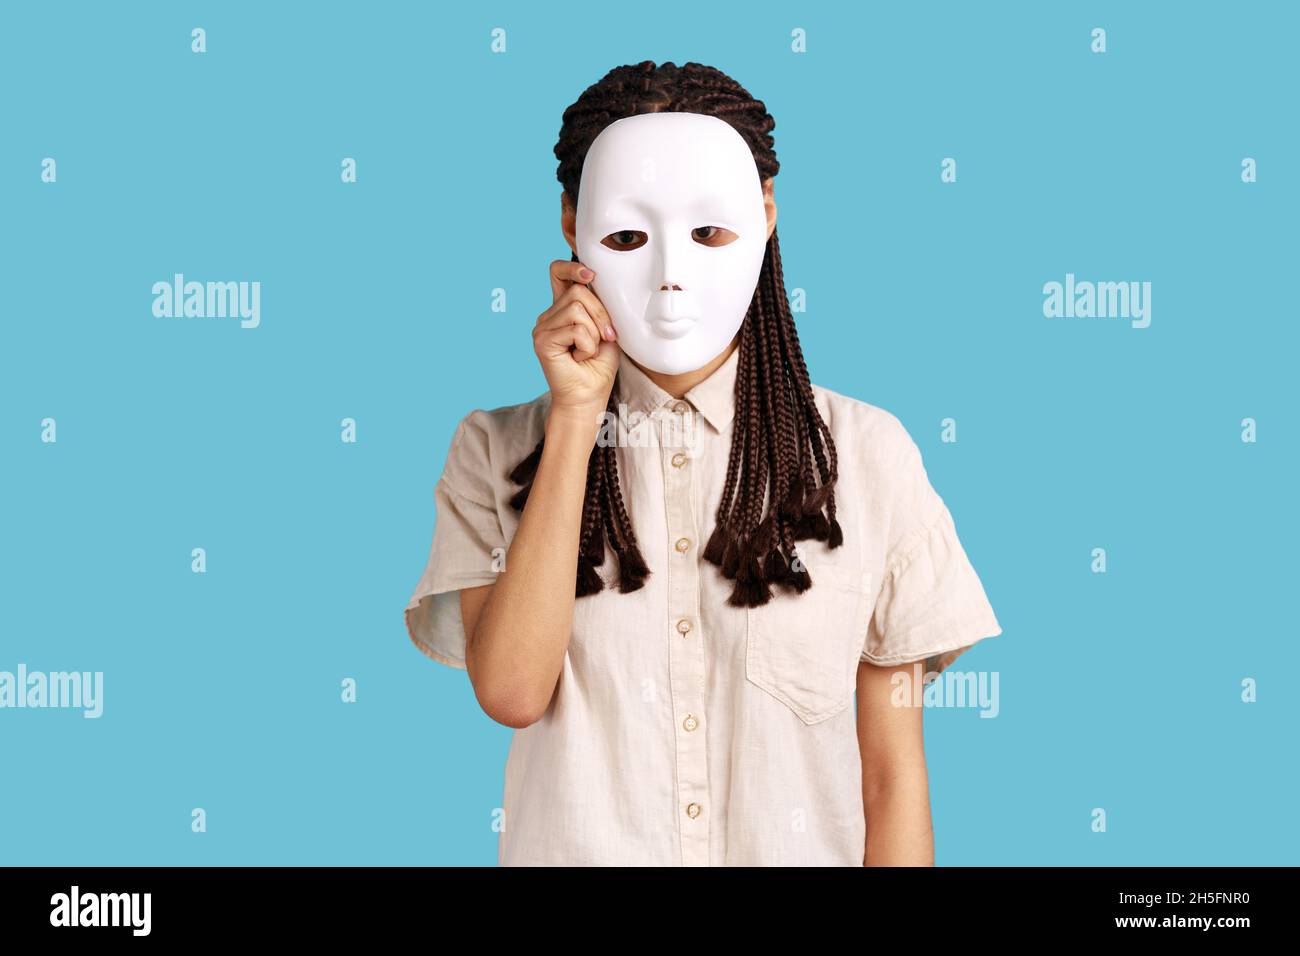 Portrait of anonymous woman with black dreadlocks hiding her face behind white mist, wants to hide his personality, wearing white shirt. Indoor studio shot isolated on blue background. Stock Photo